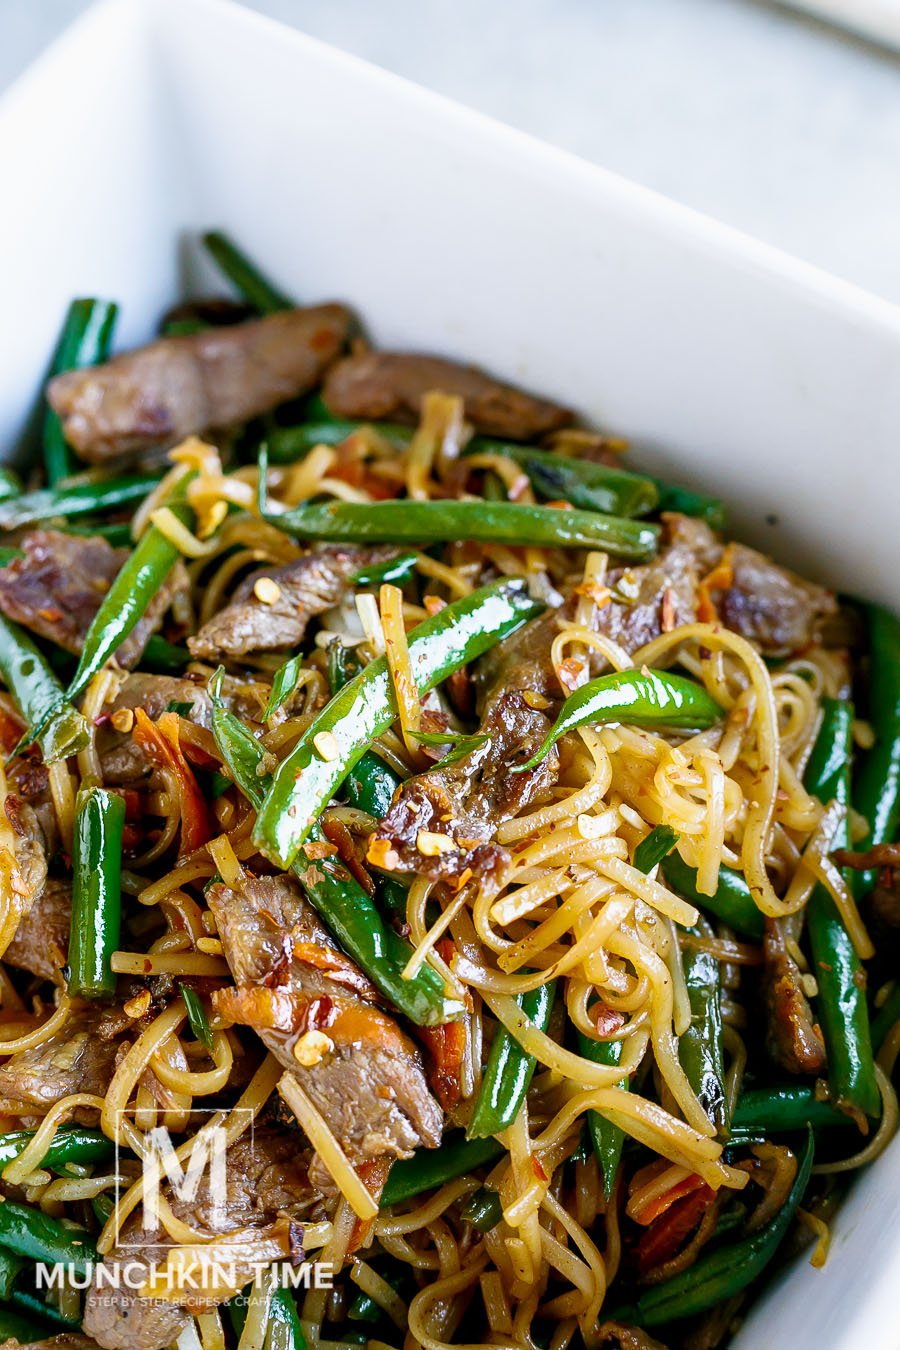 30 Minute Gluten-Free Beef Lo Mein Recipe - this dinner meal is bursting with delicious flavor. Made of Flank steak, crunchy green beans, grated carrot and amazing sauce to complete this Chinese dish. LIKE & Share!